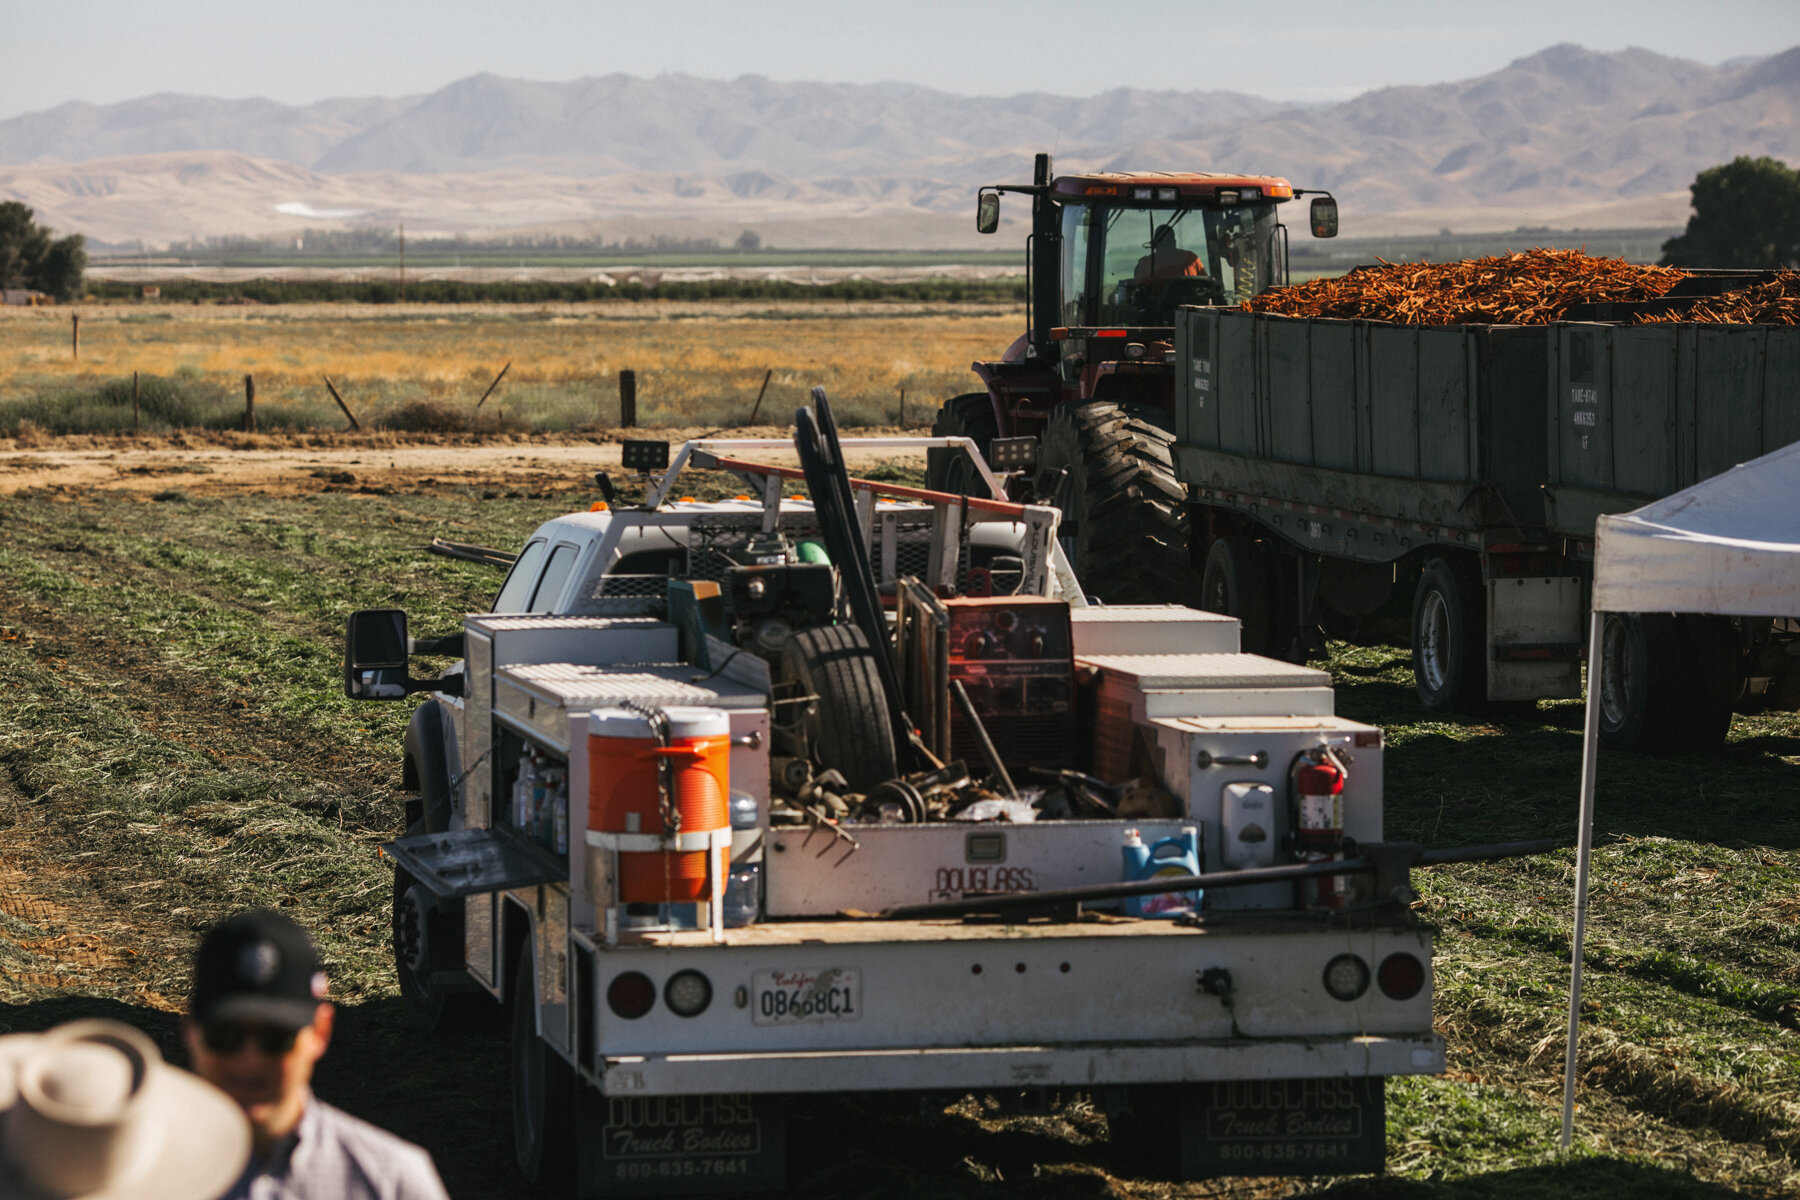  Moore Farms supplies carrots to Grimmway Farms, the largest producer of carrots worldwide. 